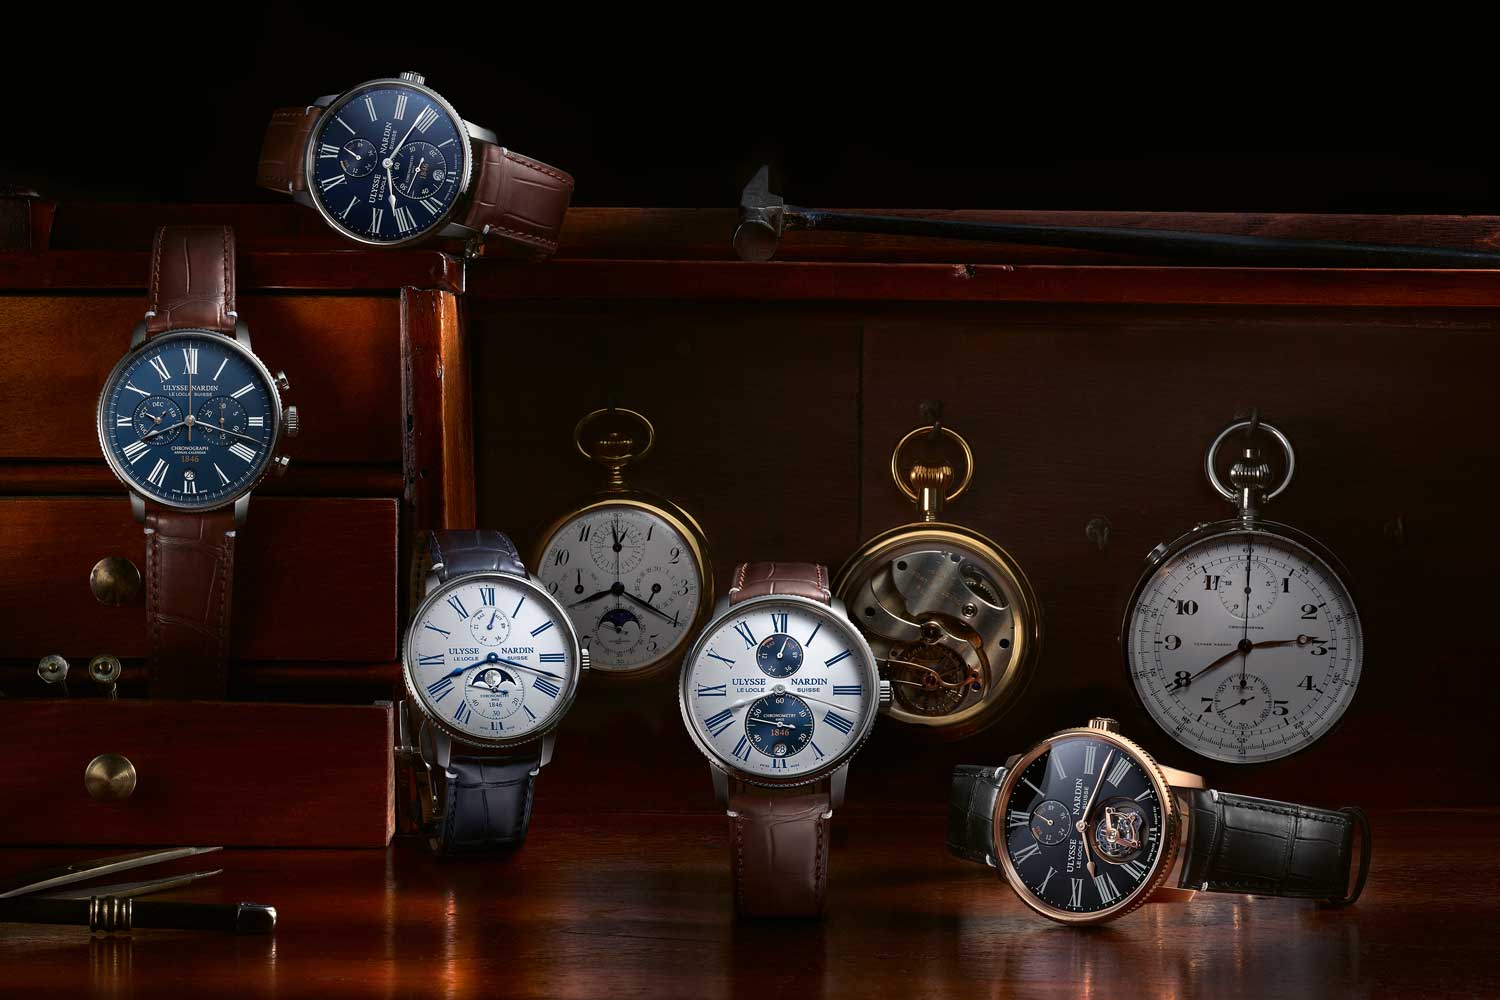 Marine Torpilleur in the foreground with historical chronometers in the background